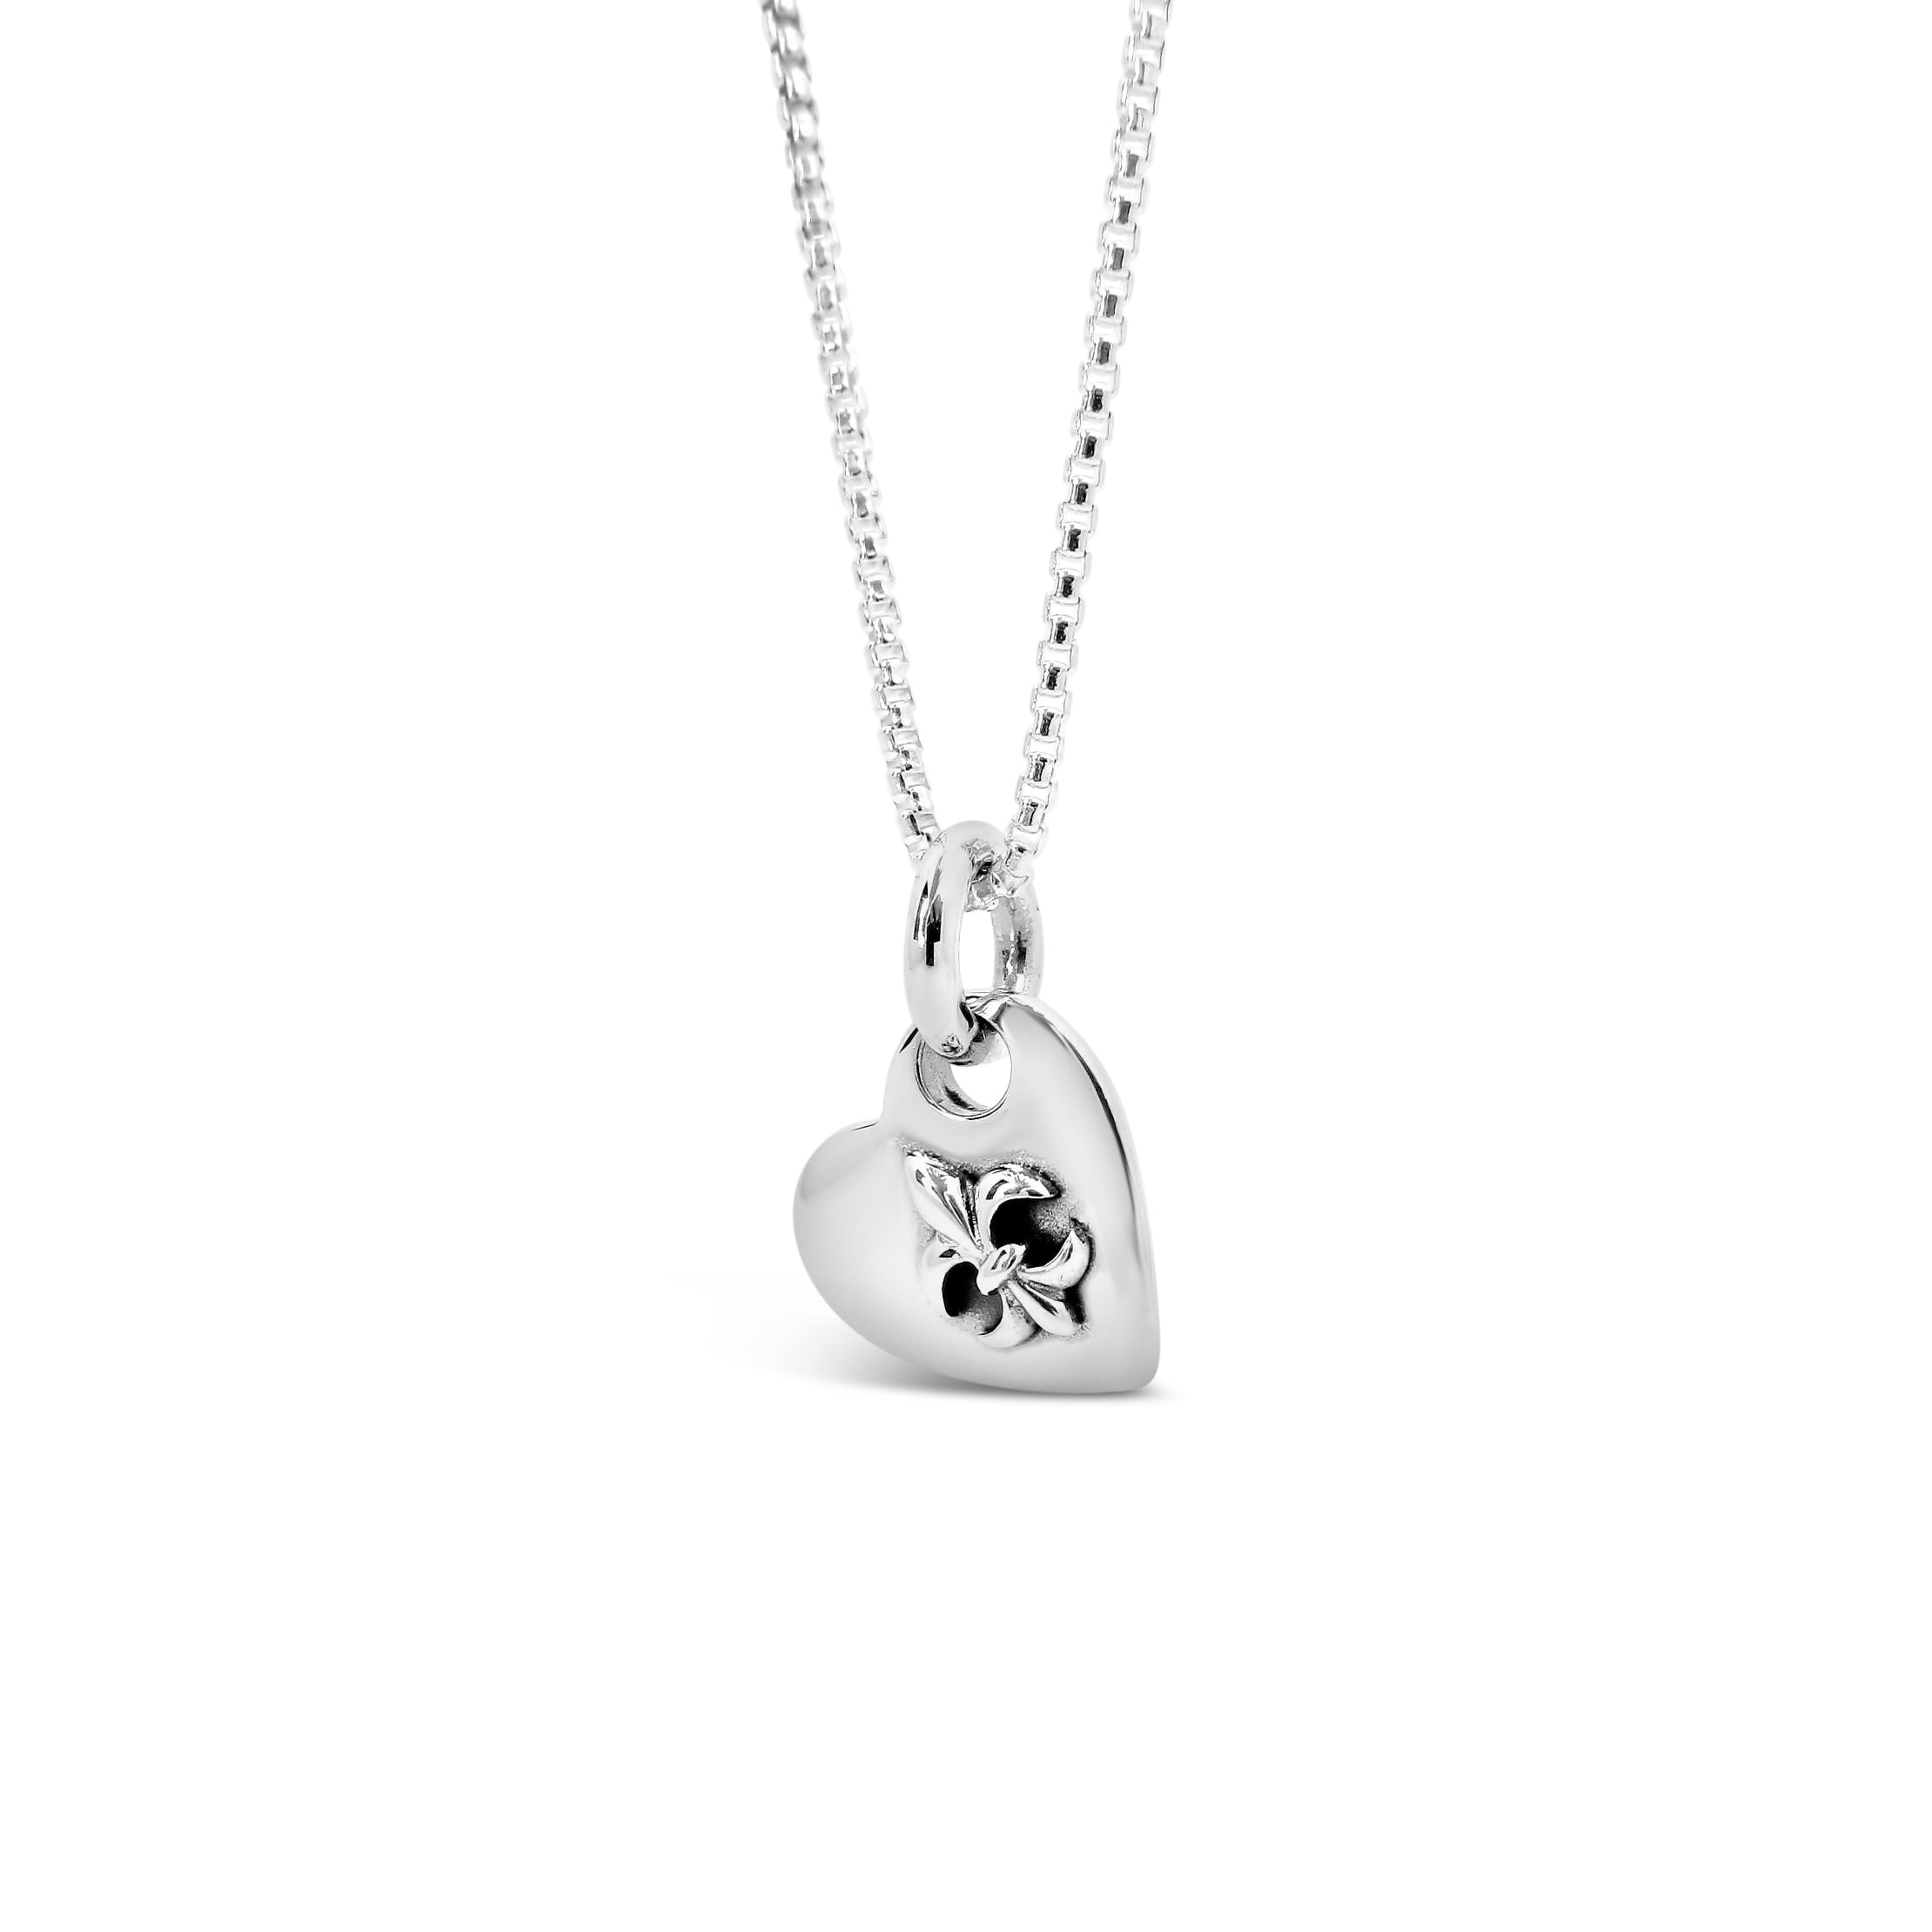 Please Return to New Orleans Heart Couture Charm – Cristy Cali